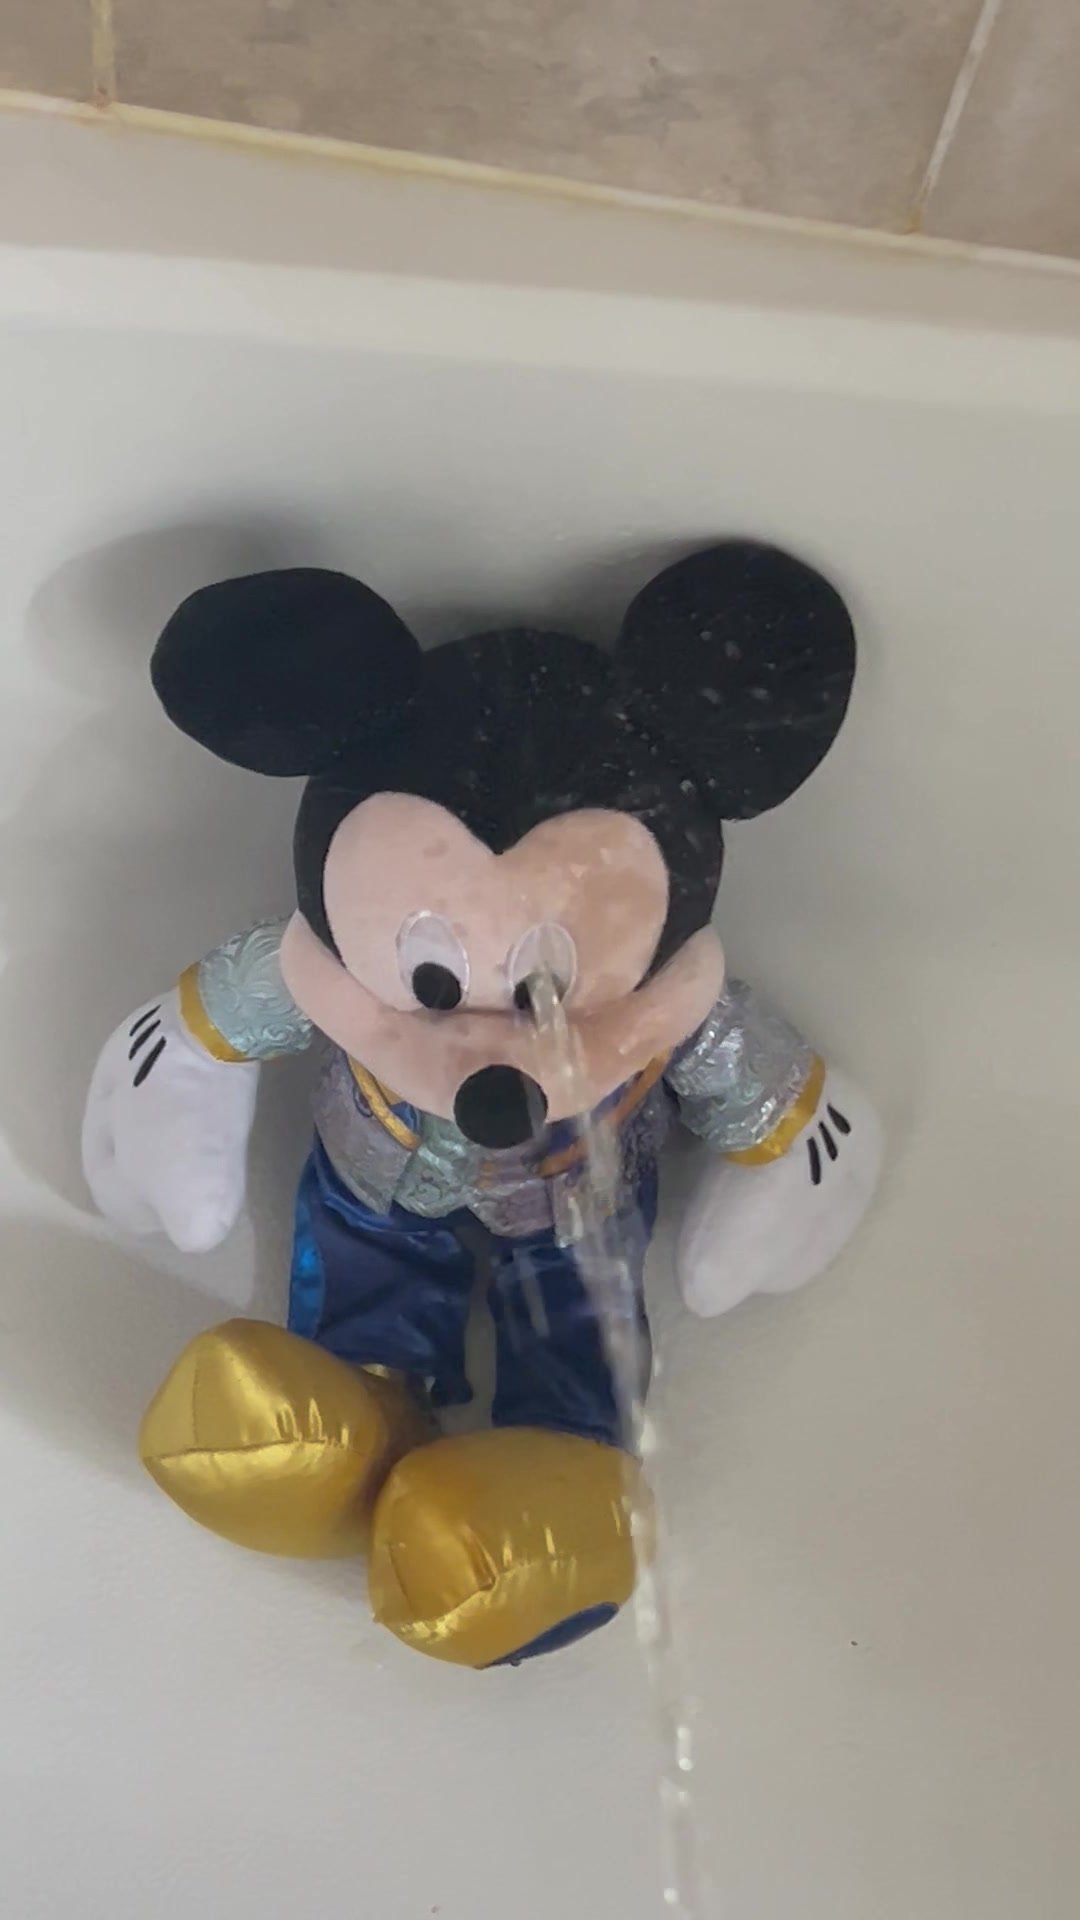 A Fancy Mickey Plush Gets Showered In Piss